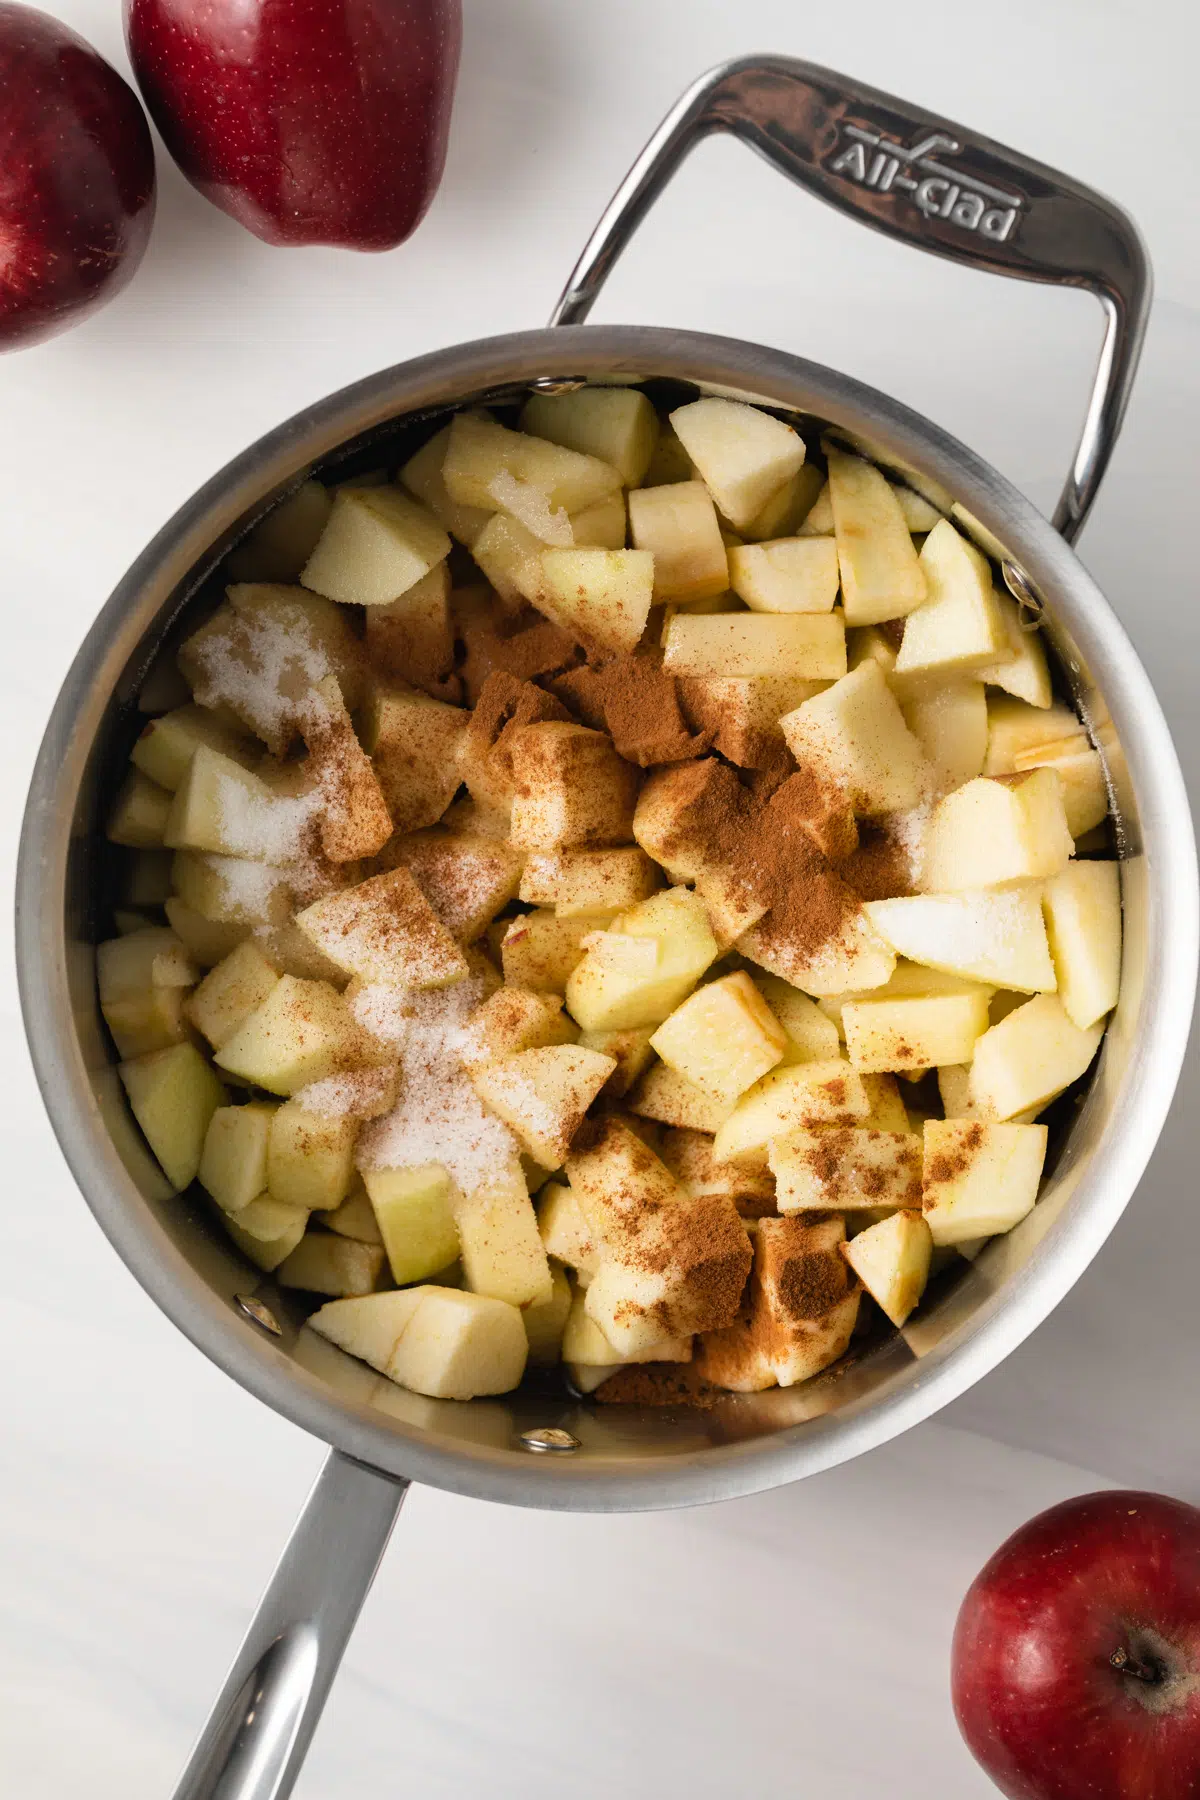 Diced apples with spices in saucepan.